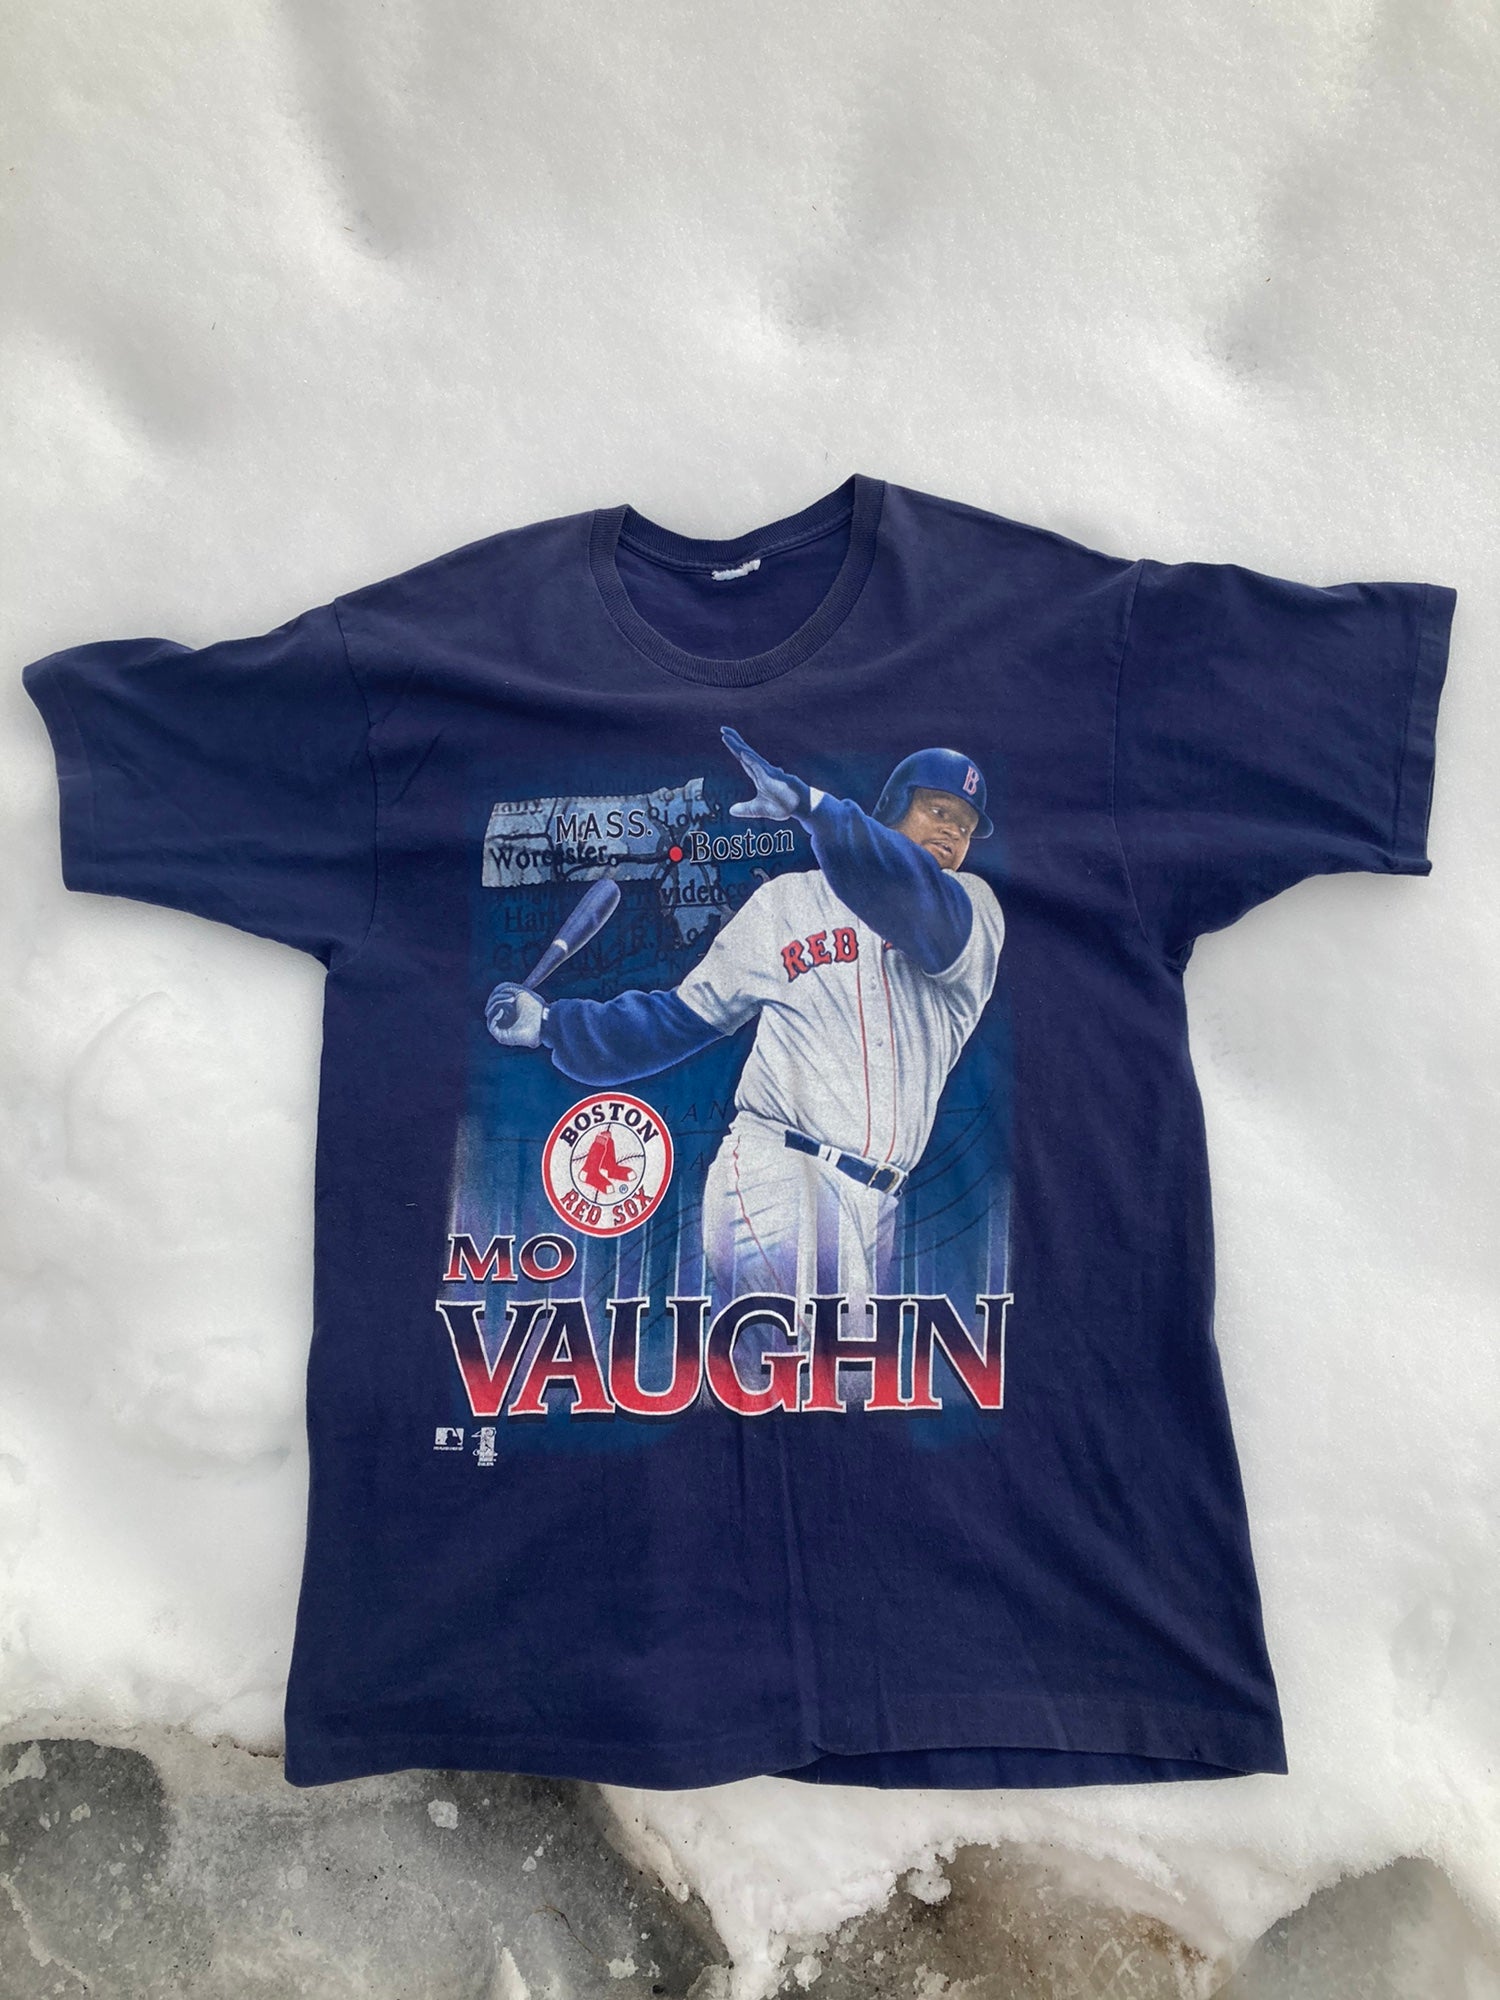 Mo Vaughn T-Shirts for Sale